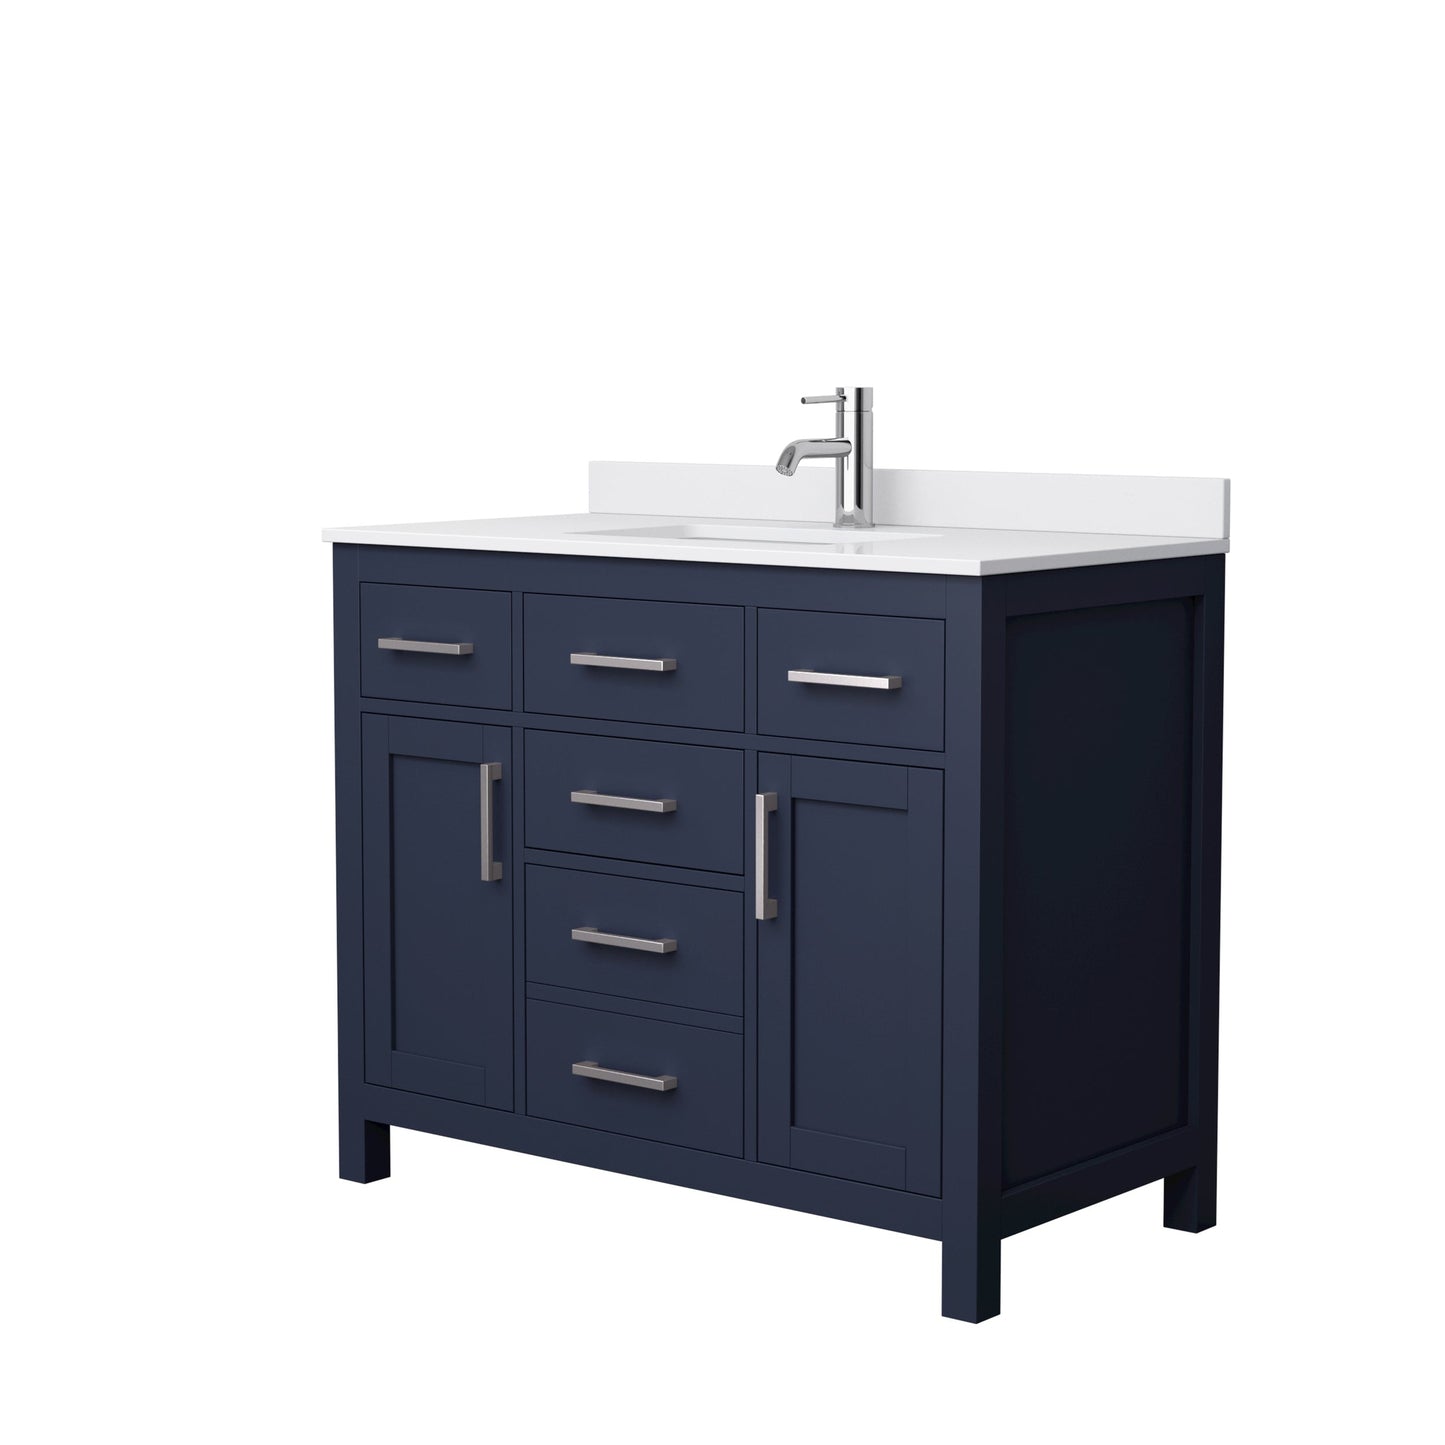 Wyndham Collection Beckett 42" Single Bathroom Dark Blue Vanity With White Cultured Marble Countertop, Undermount Square Sink And Brushed Nickel Trim